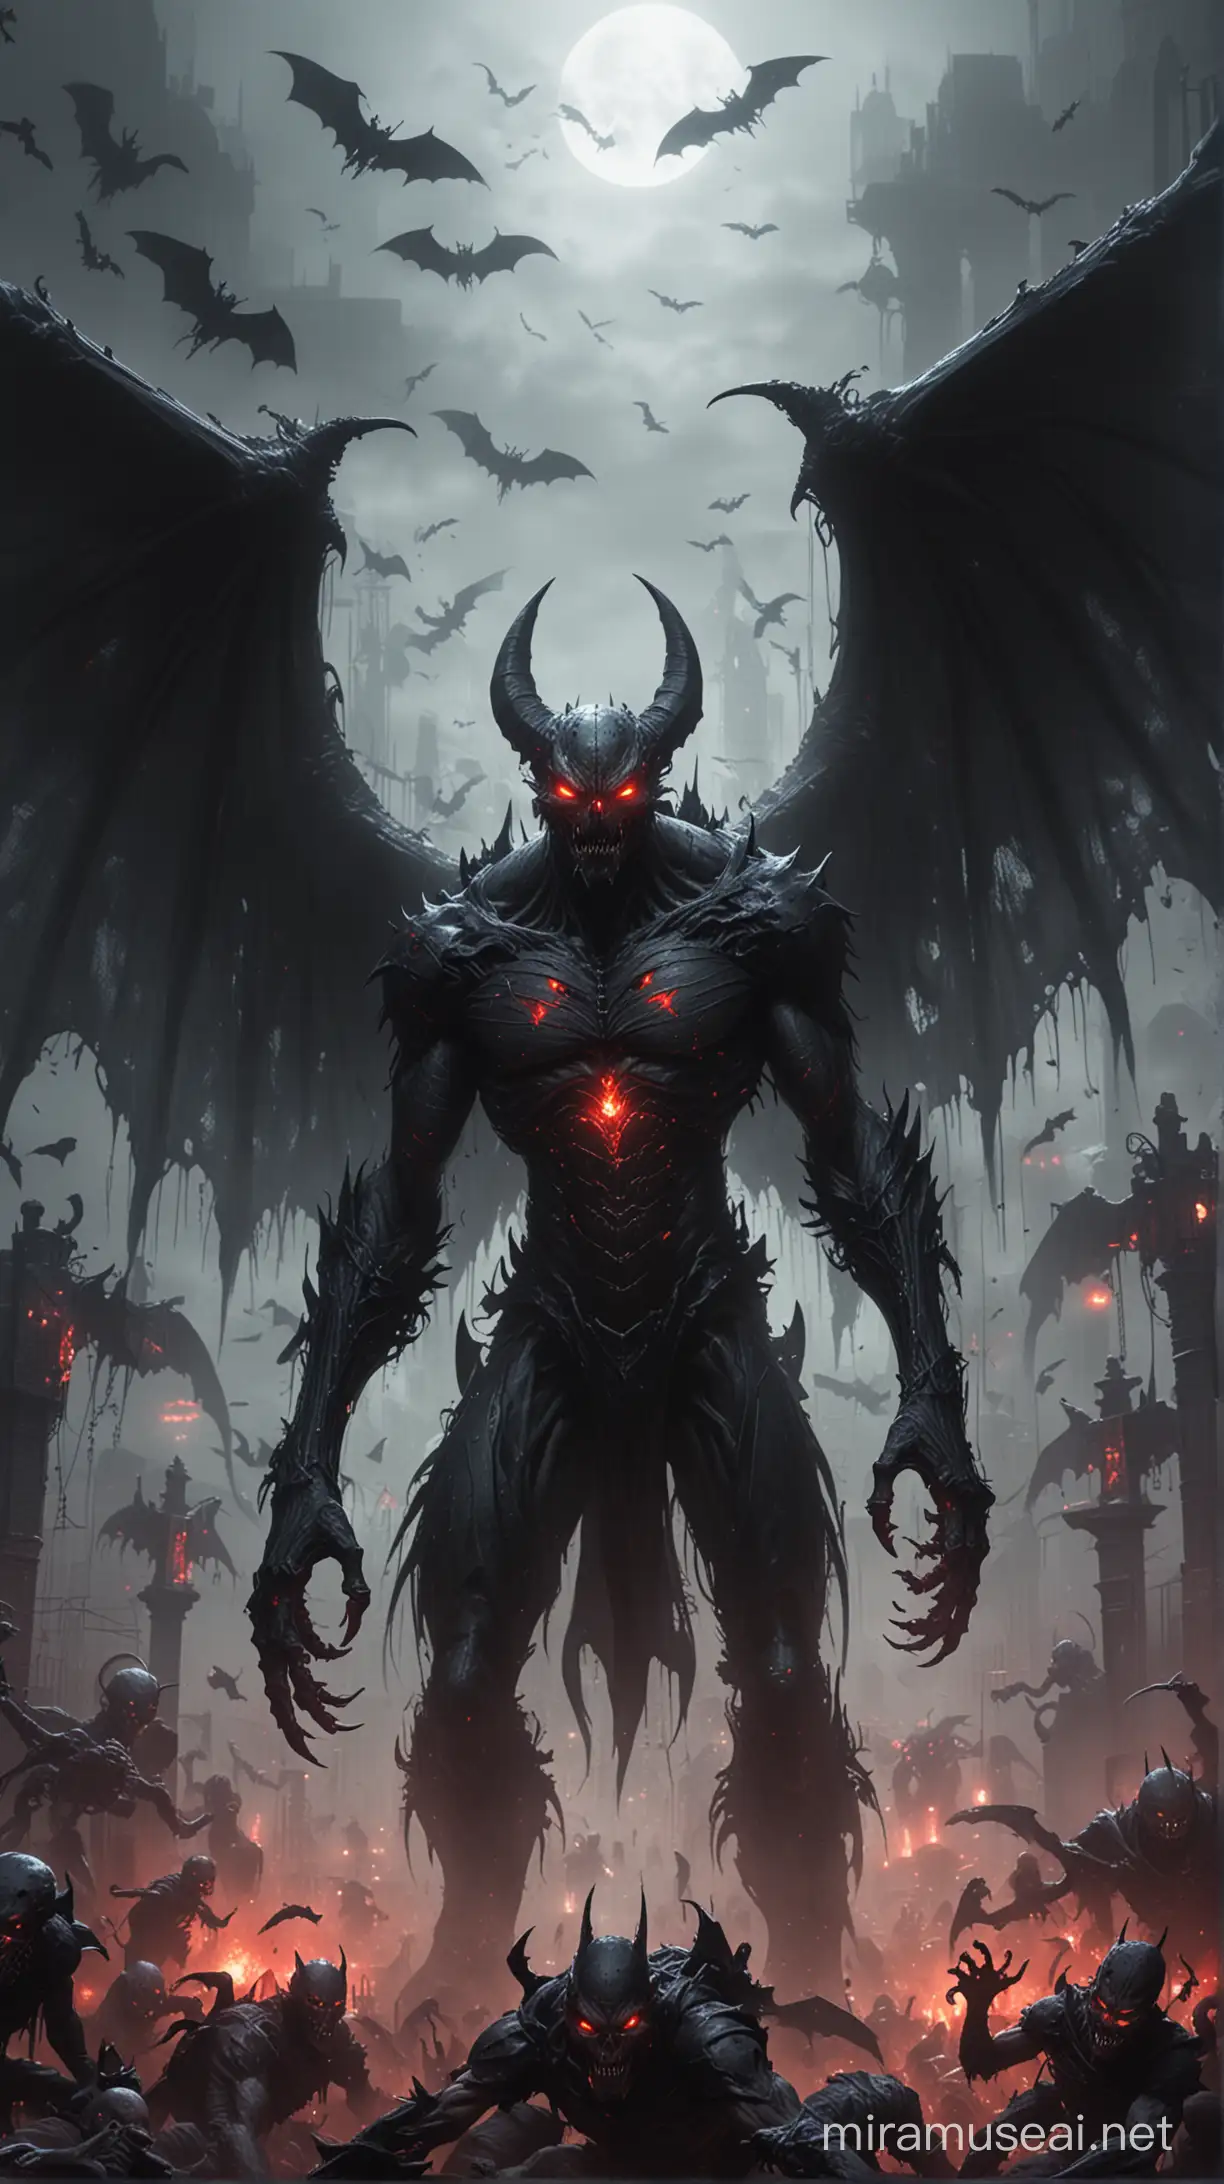 A monstrous humanoid creature with bat-like wings and insectoid features, its black wings stretched wide, red eyes glowing ominously in a dark foggy graveyard surrounded by demon zombie creatures.